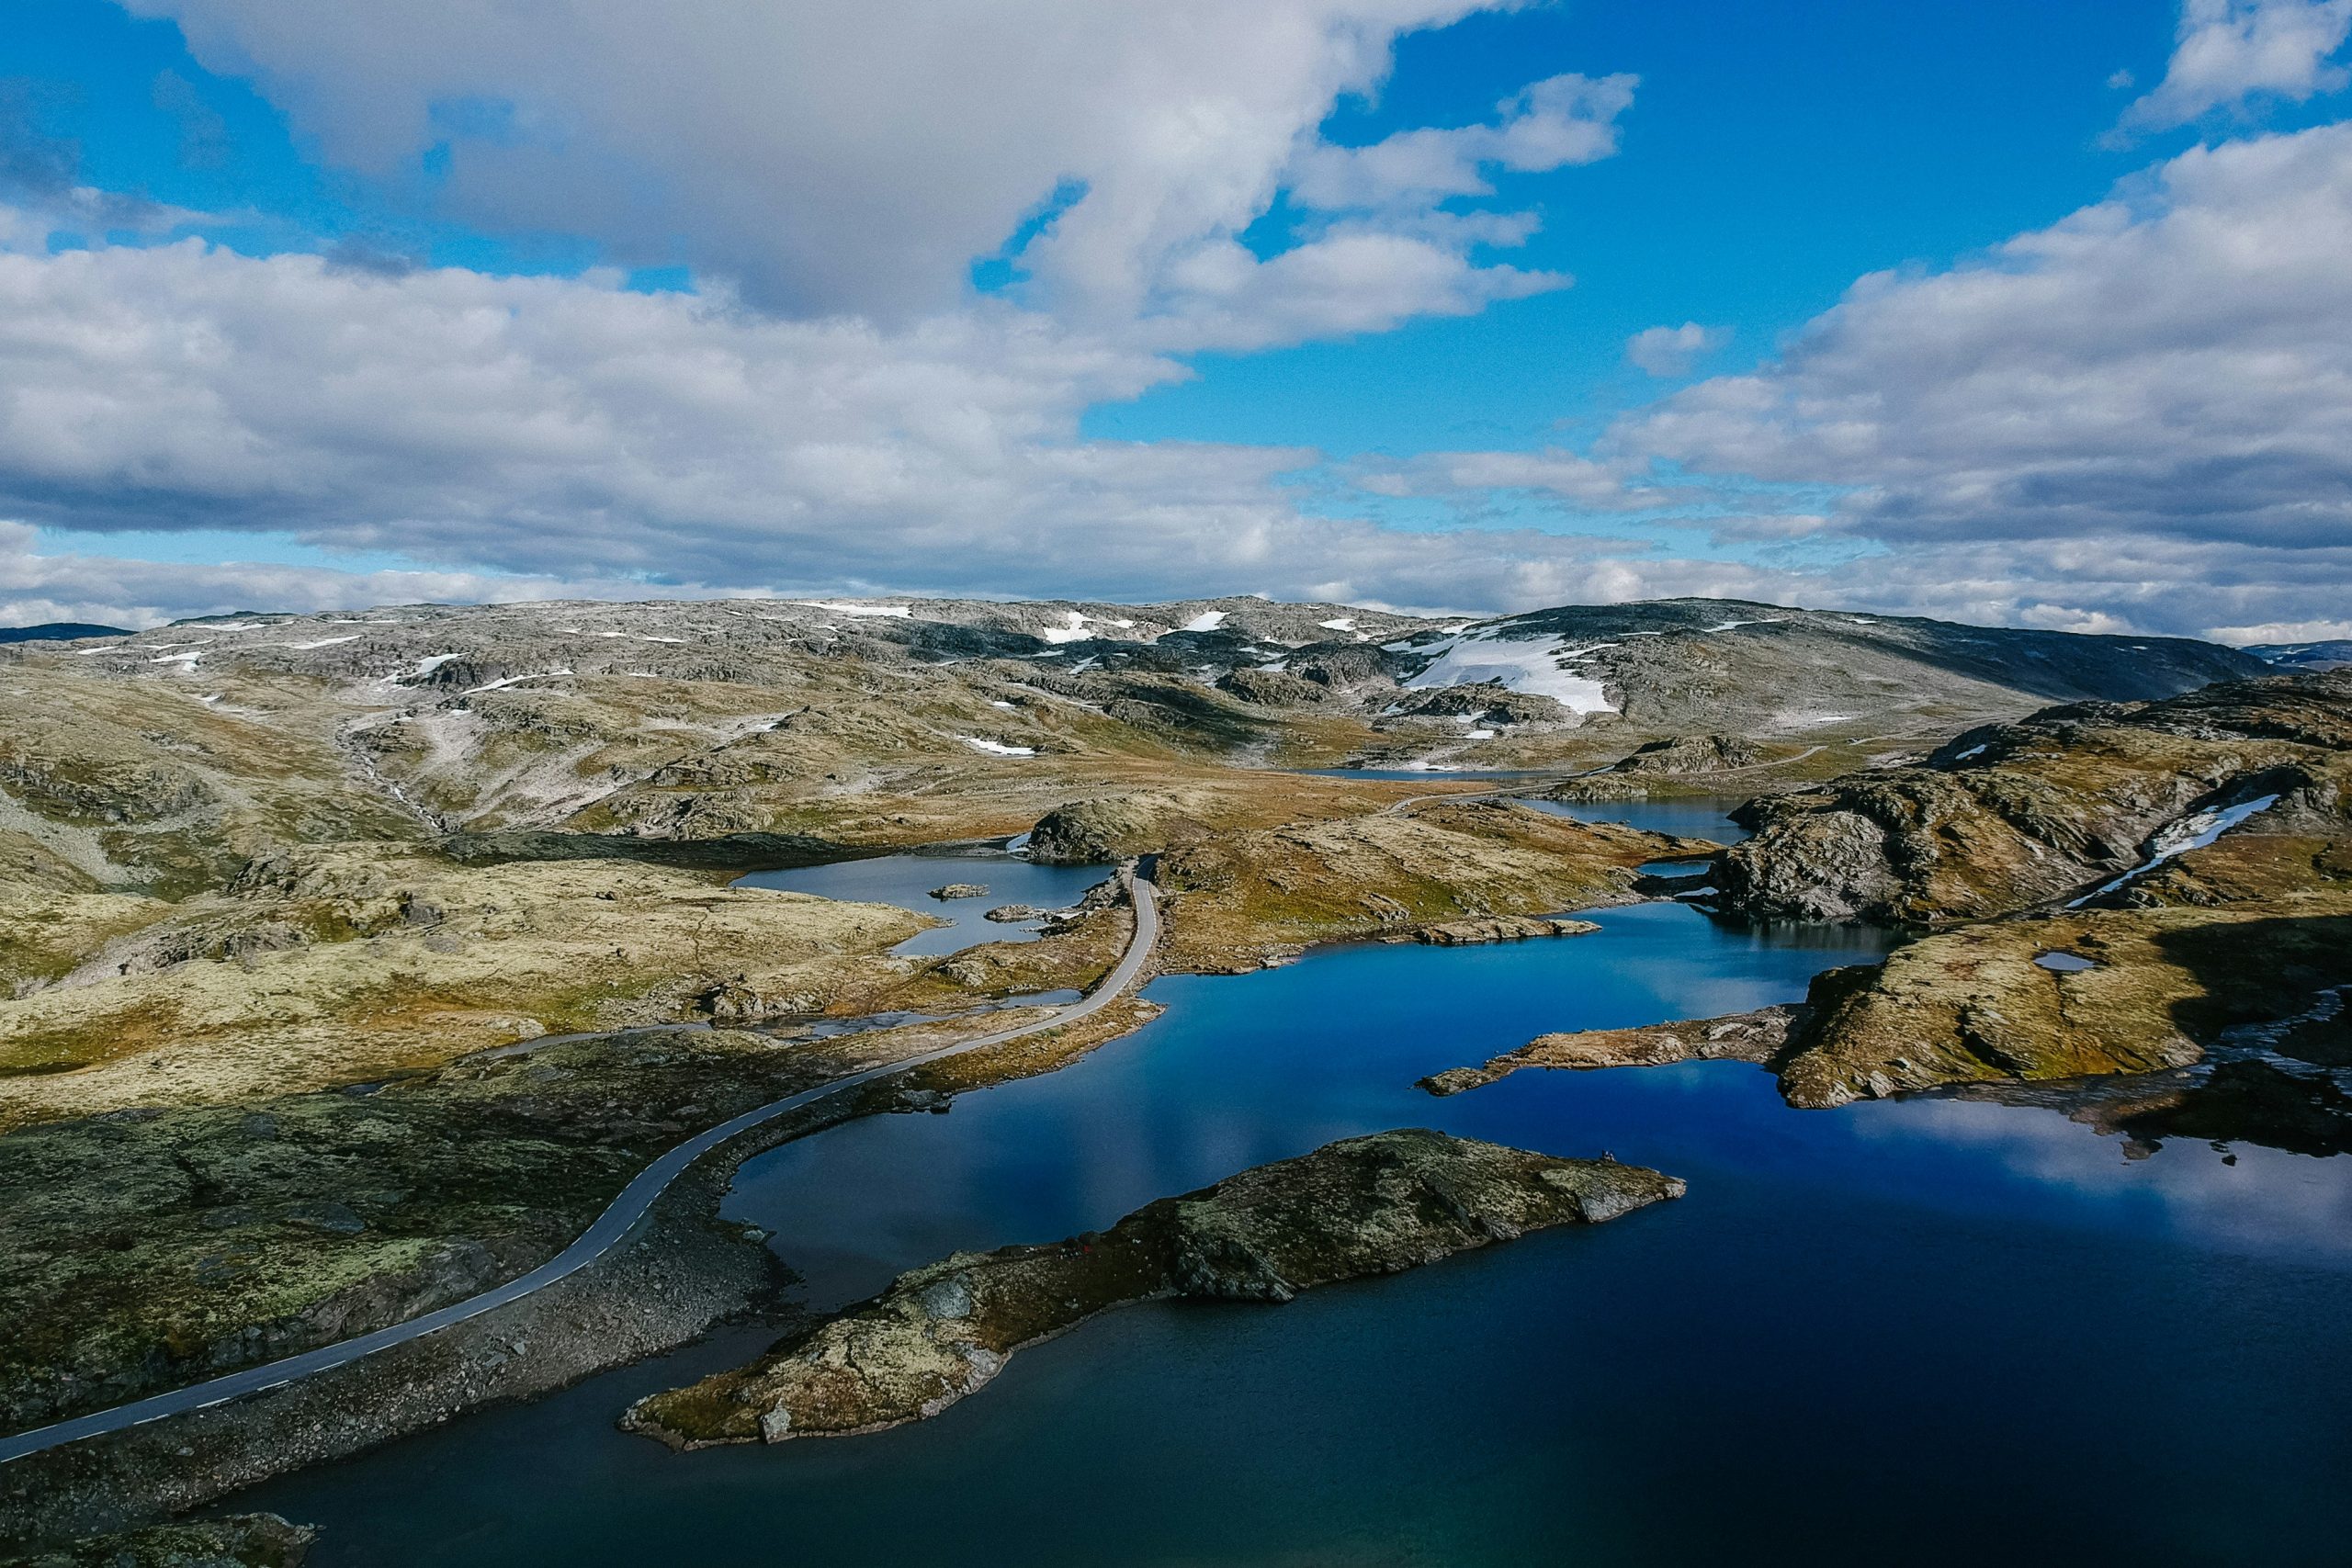 explore stunning fjords and breathtaking natural landscapes in norway with our detailed travel guides. discover the beauty of norwegian fjords and plan your next adventure.